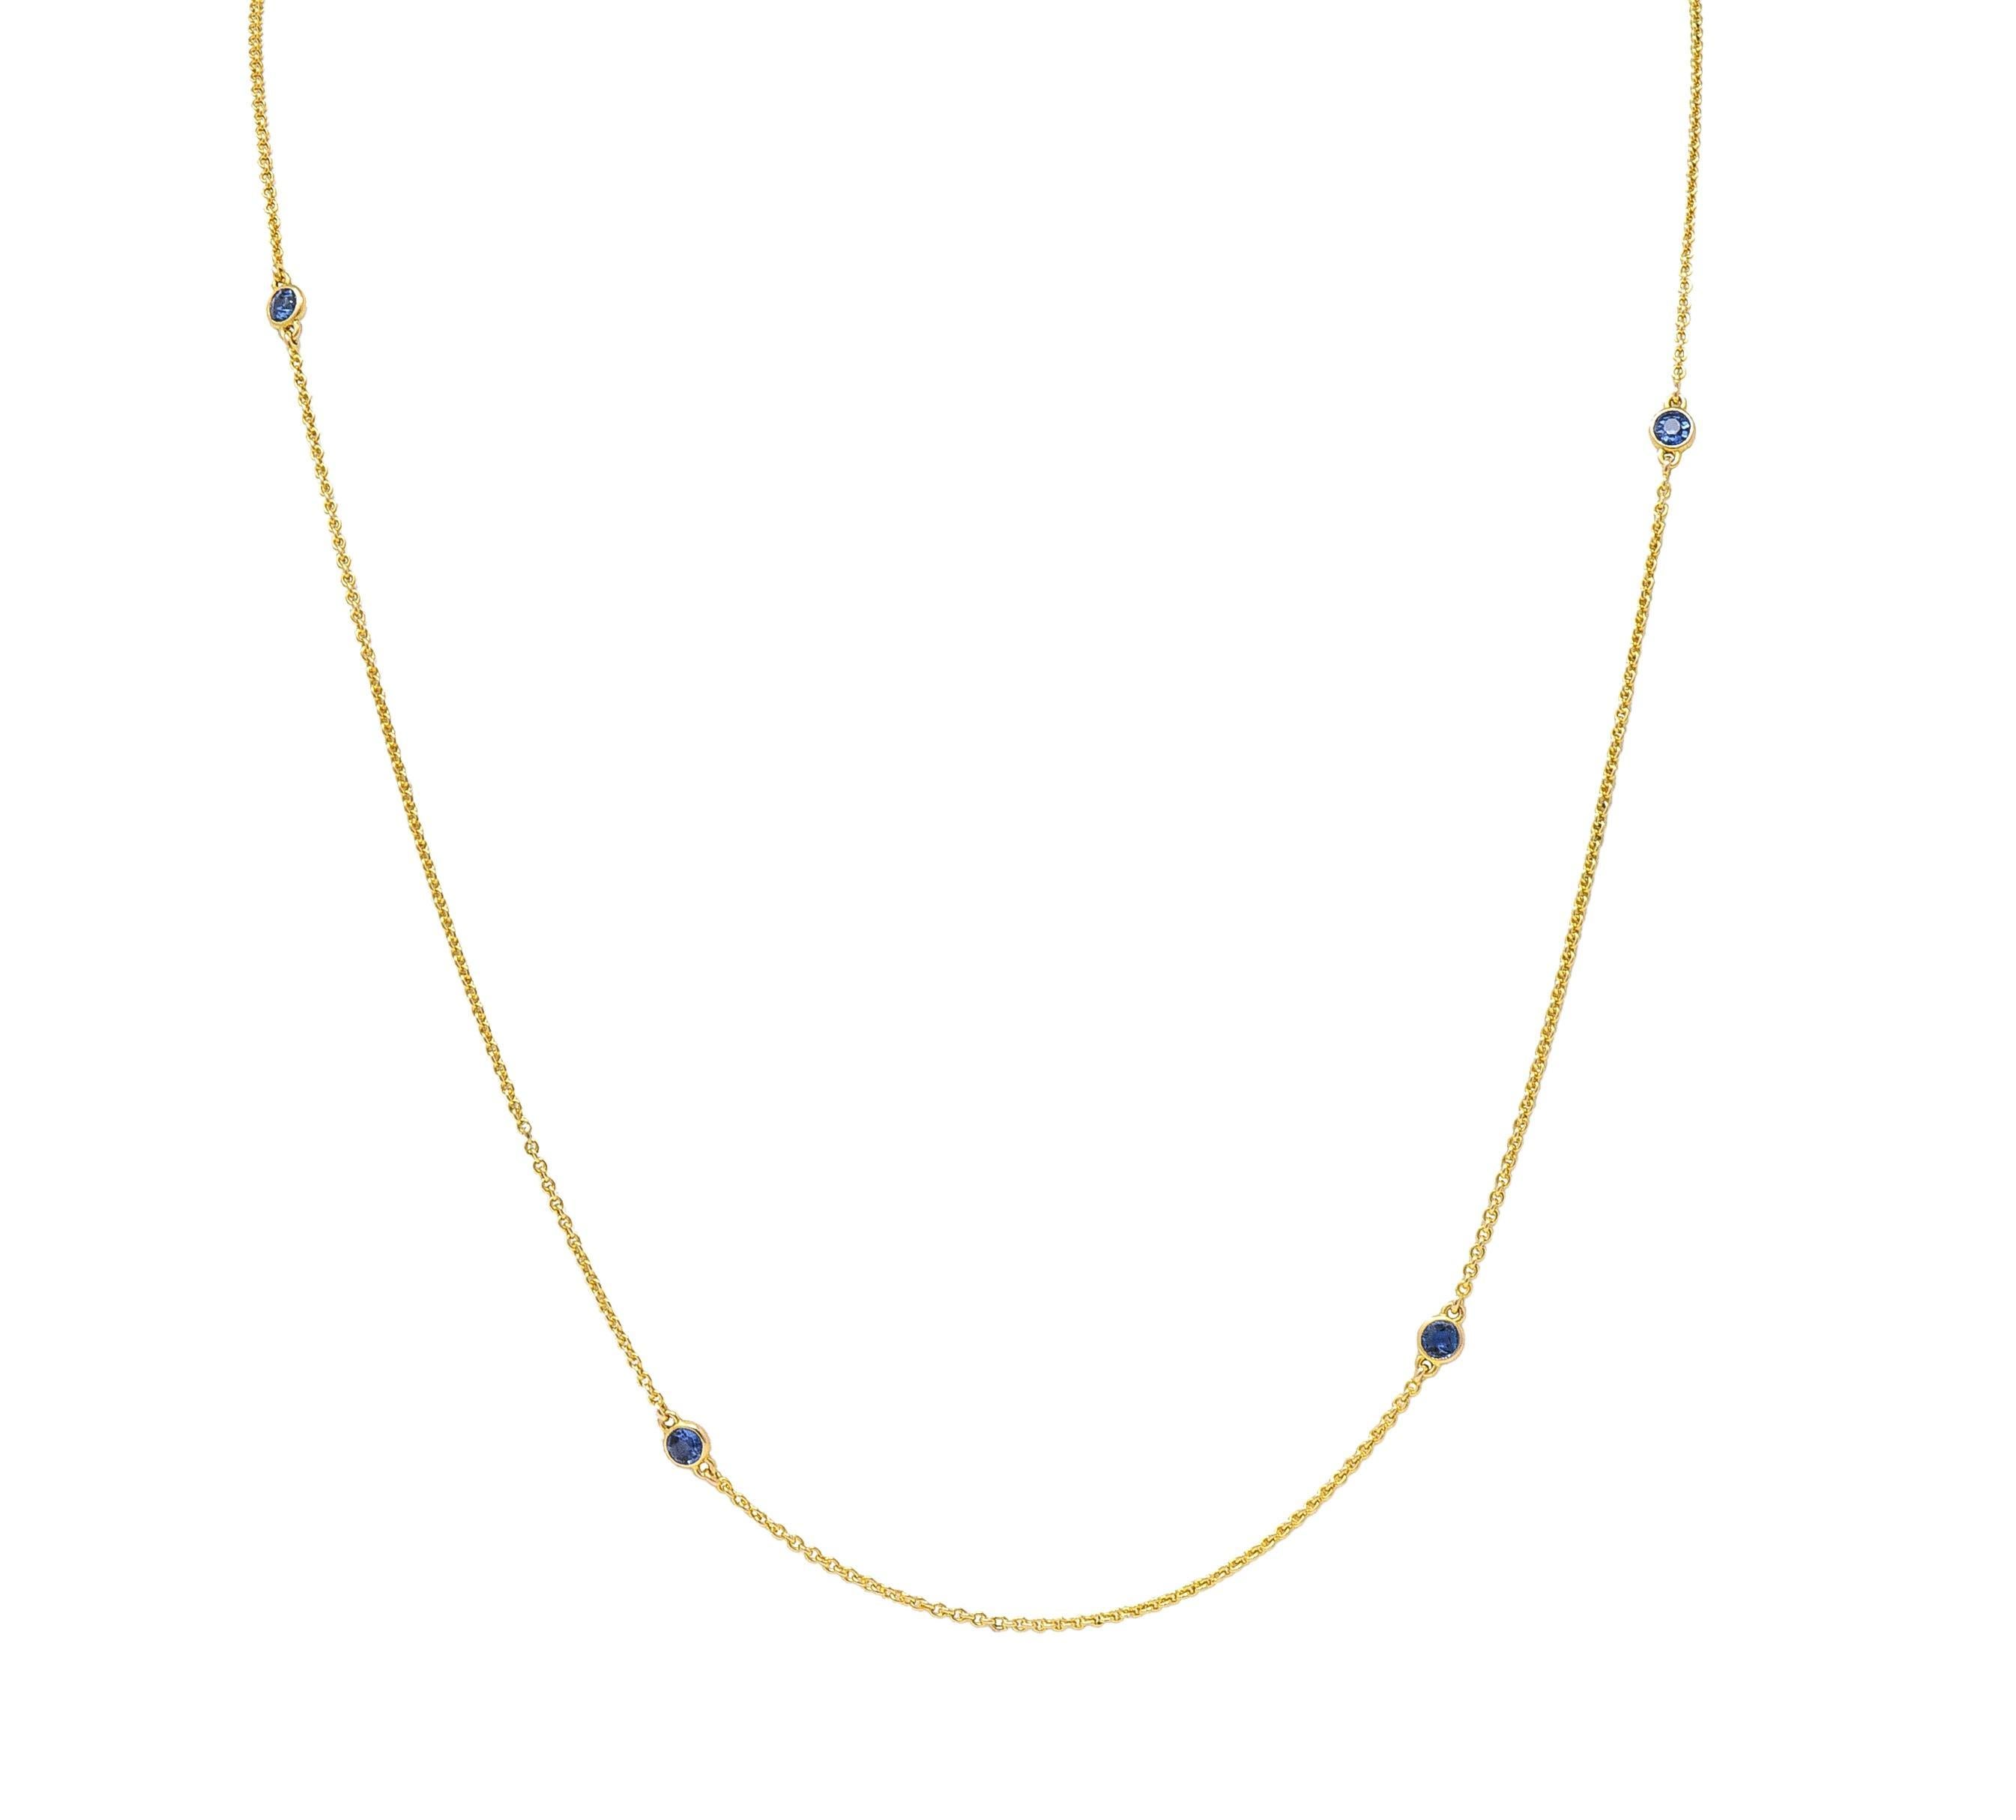 Victorian 2.10 CTW Sapphire 14 Karat Yellow Gold Antique Station Chain Necklace For Sale 6